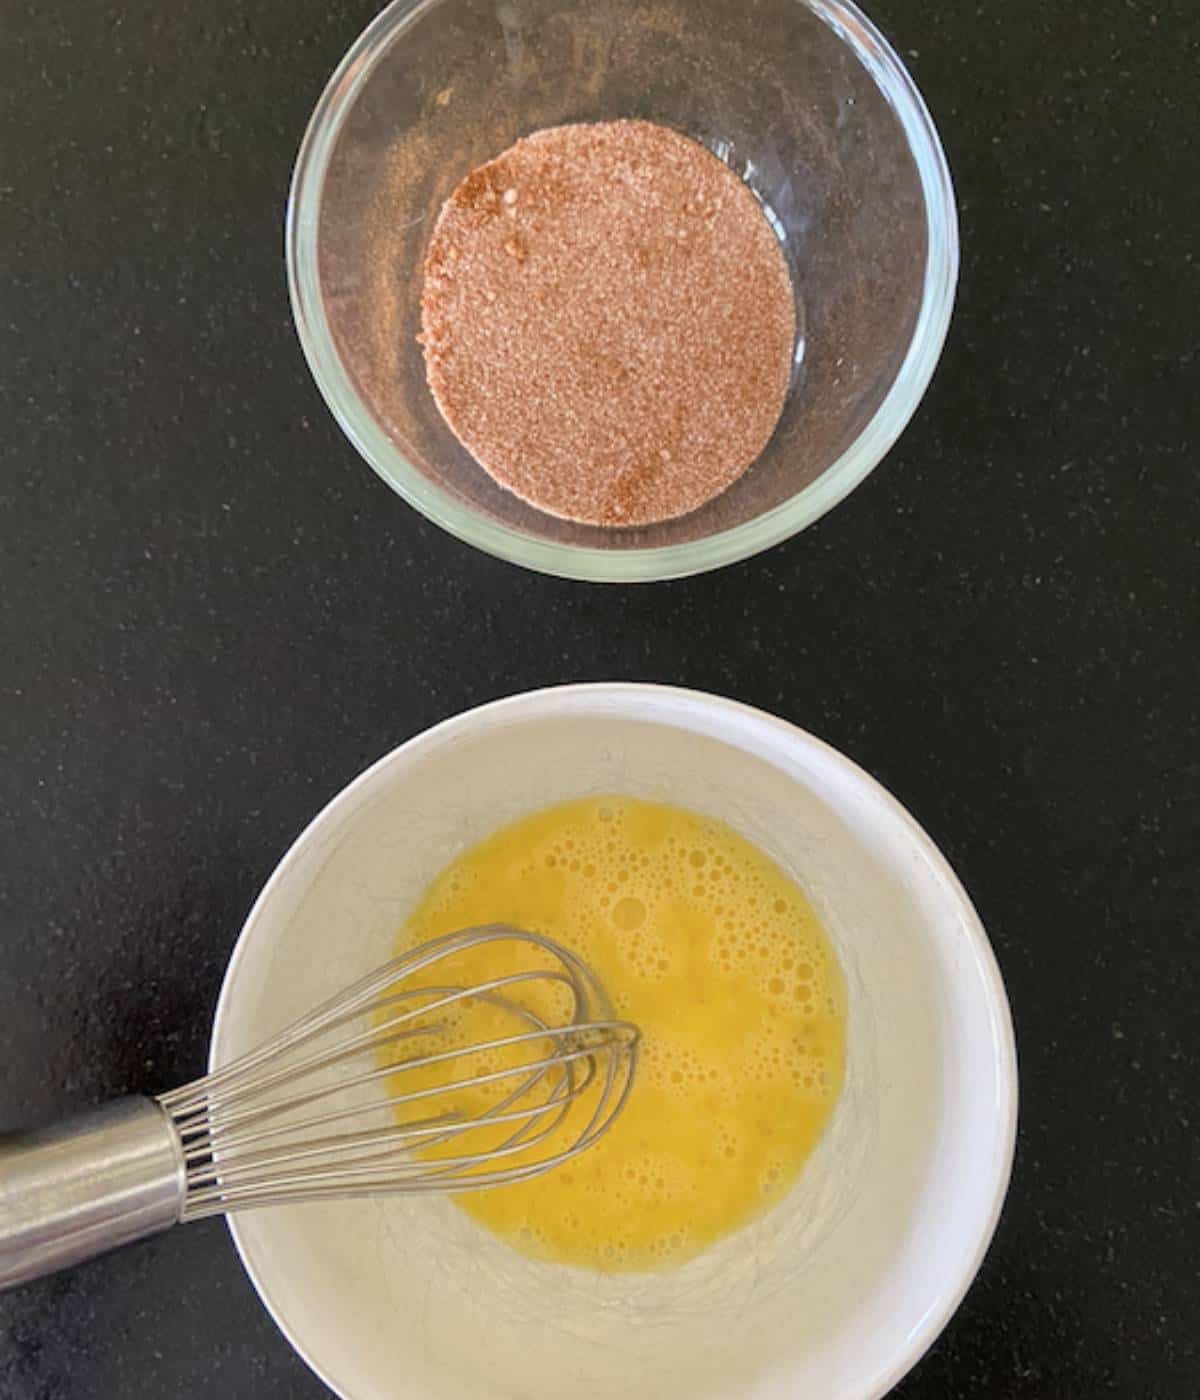 Cinnamon sugar in one bowl and egg wash in another.